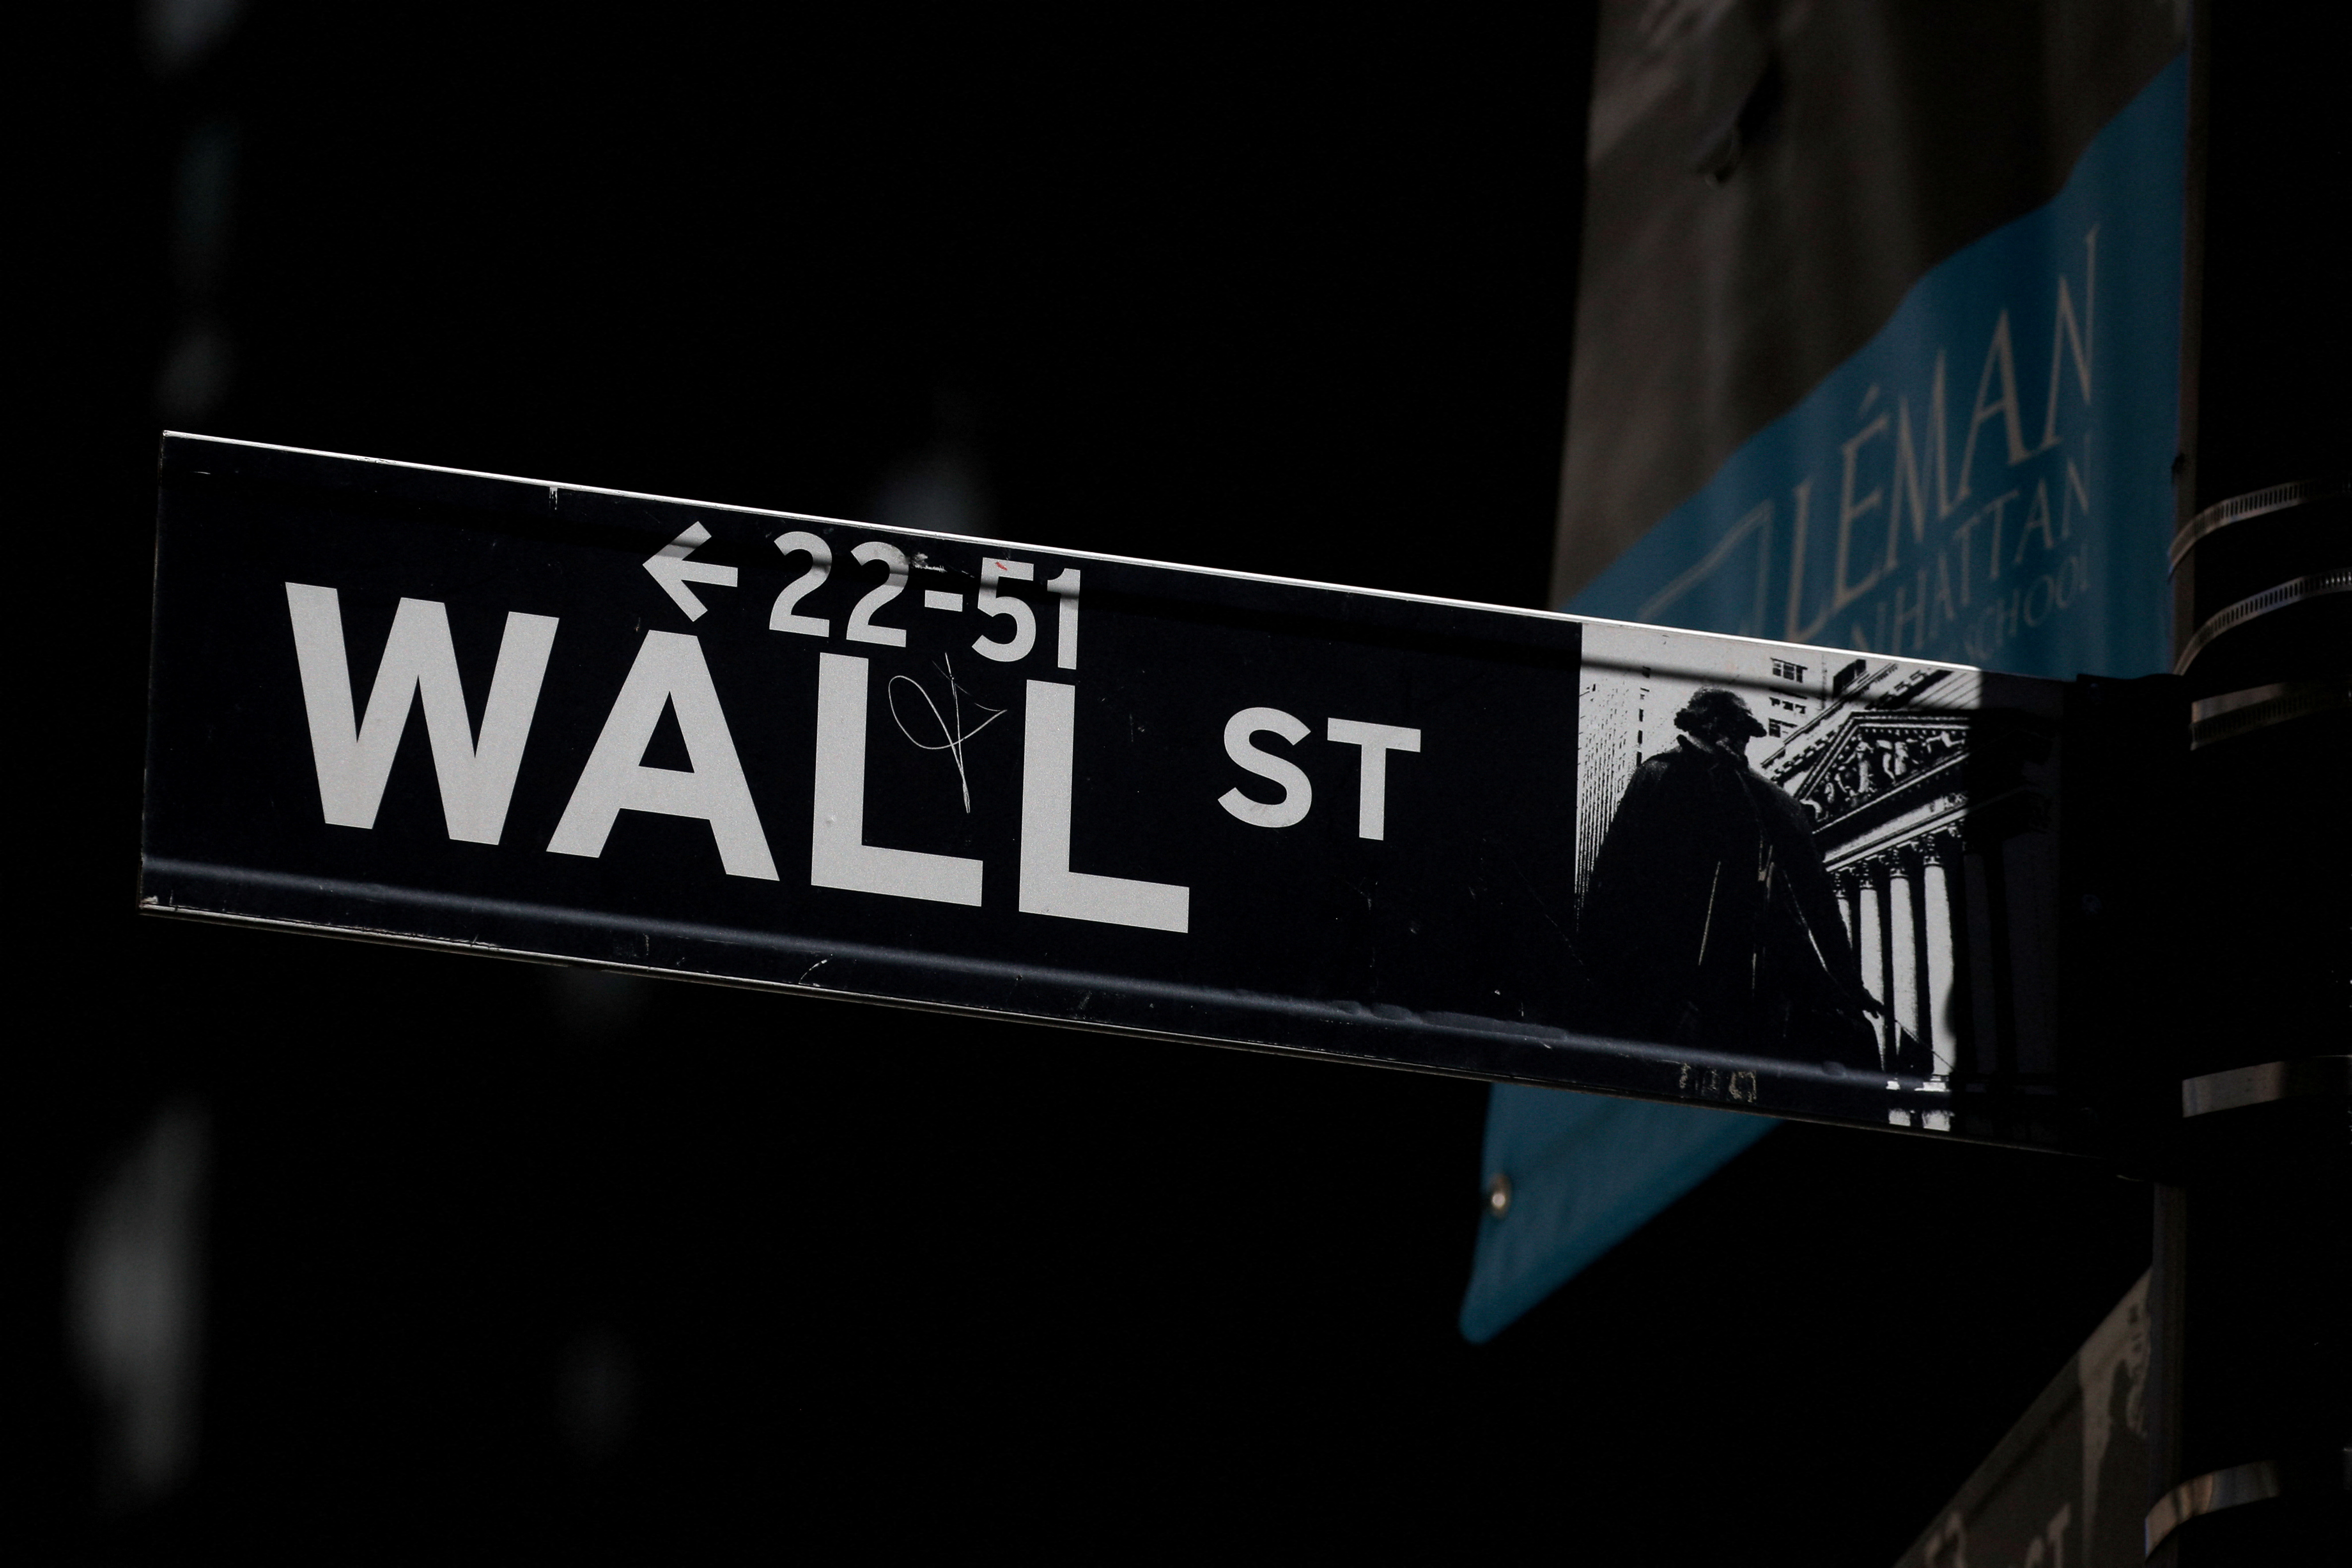 FILE PHOTO: A Wall St. street sign is seen near the New York Stock Exchange (NYSE) in New York City, U.S., September 17, 2019. REUTERS/Brendan McDermid/File Photo